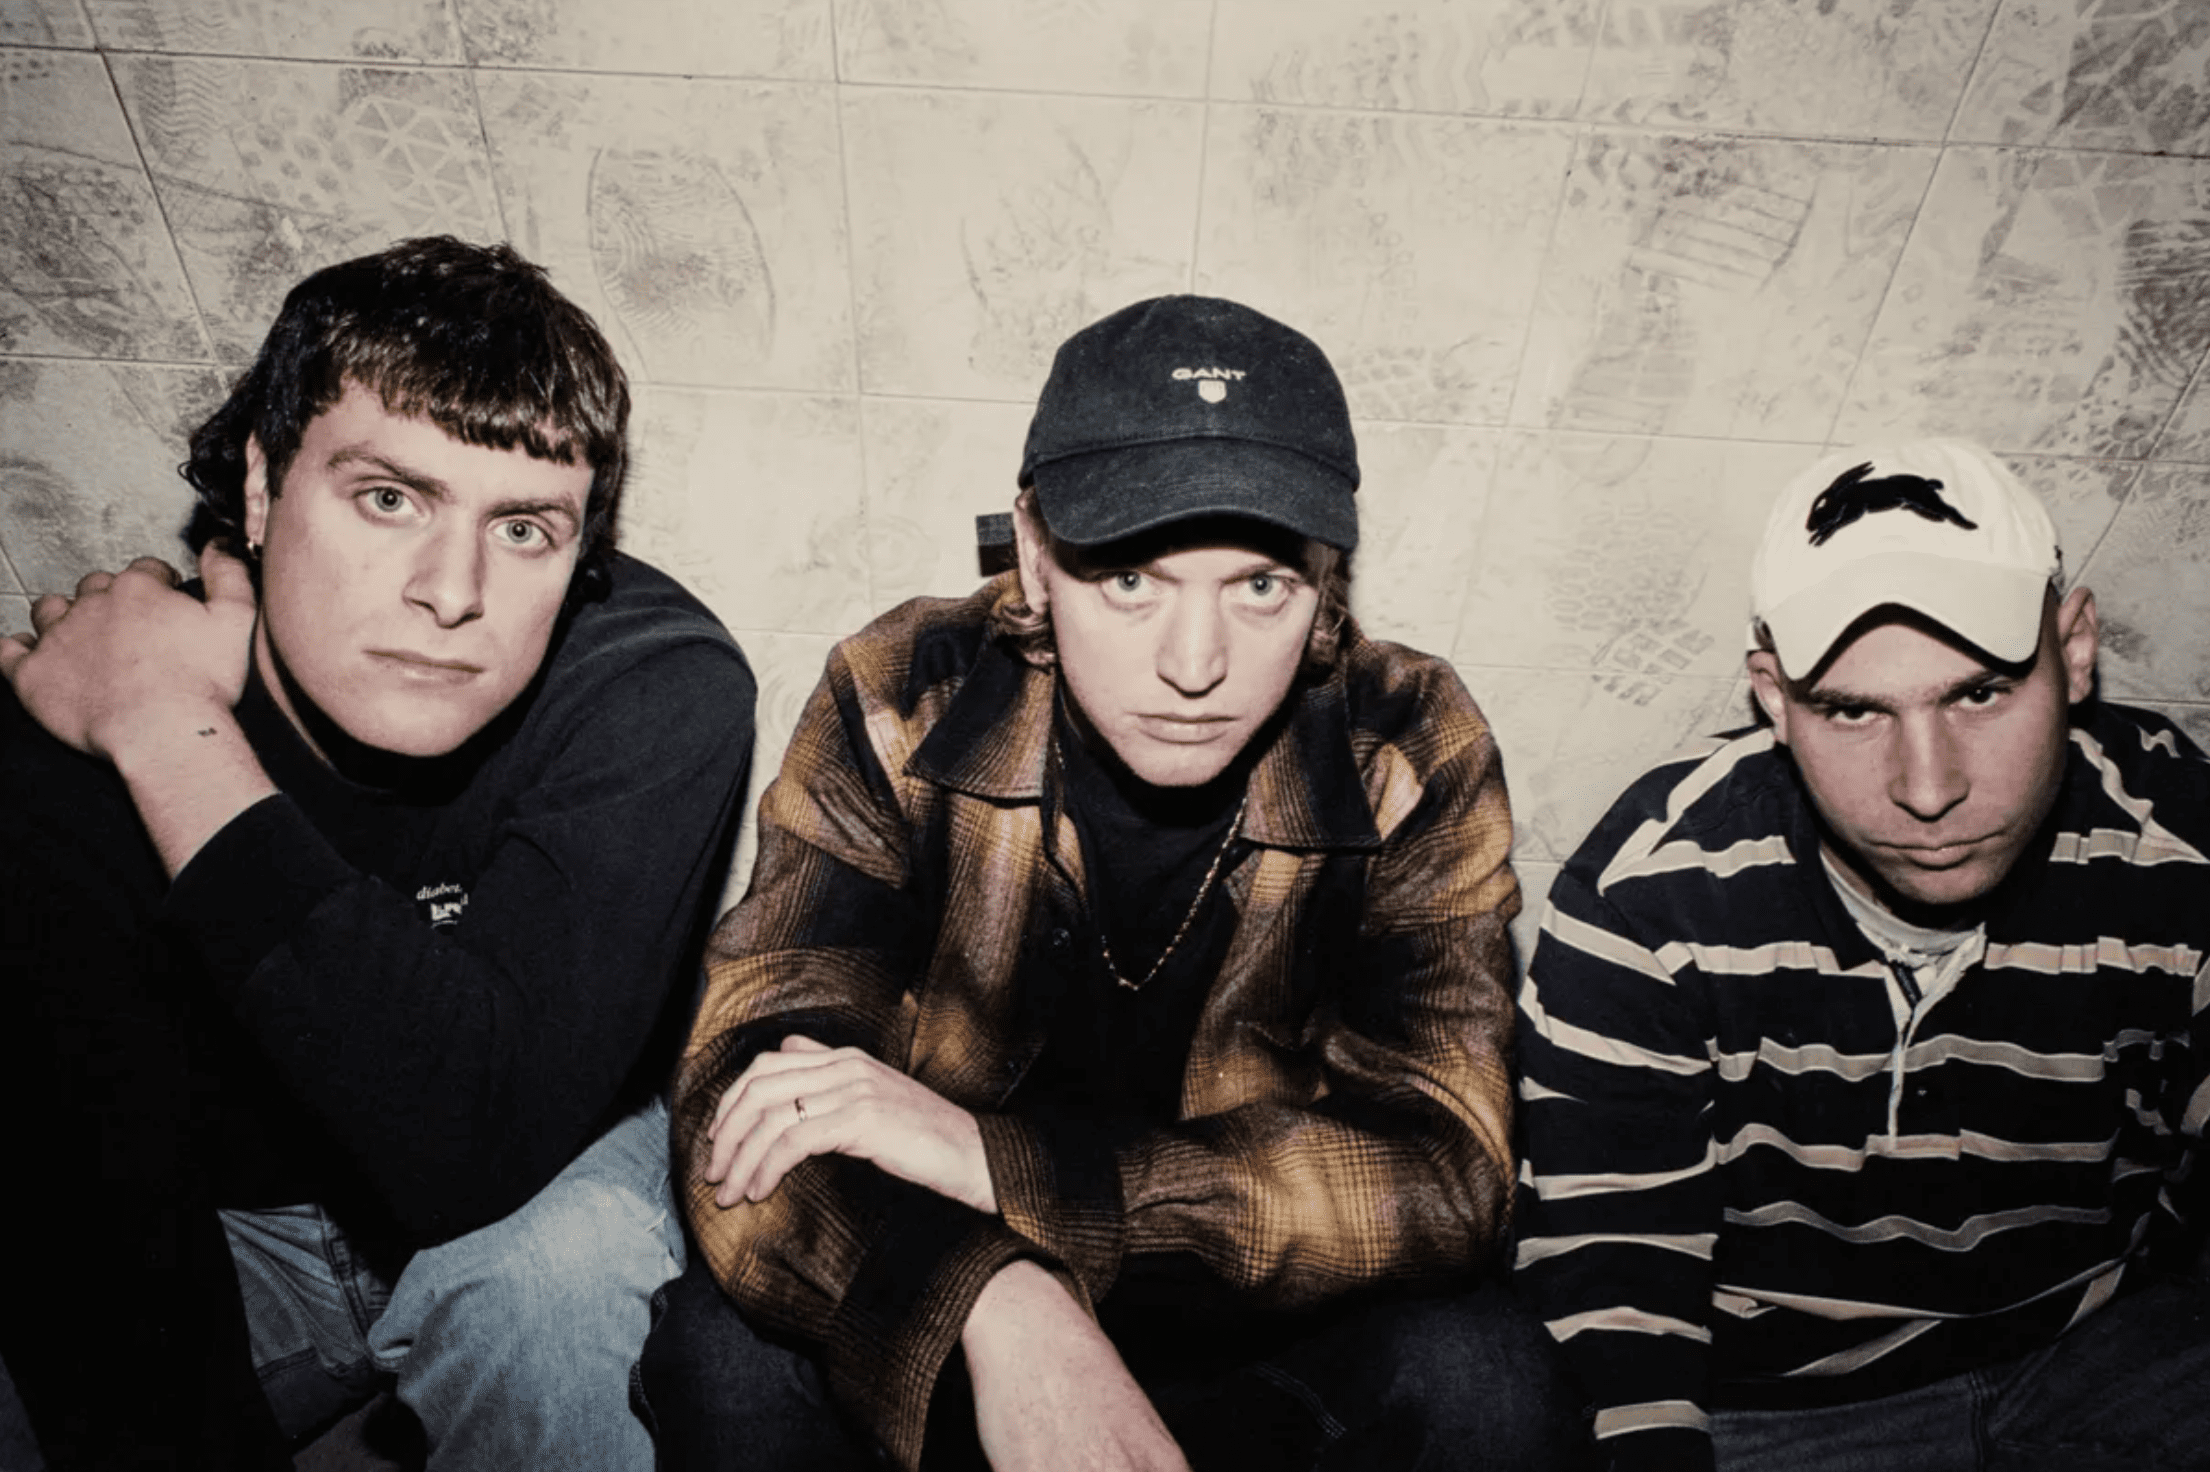 DMA’s Go for BritElectroPop on ‘The Glow’